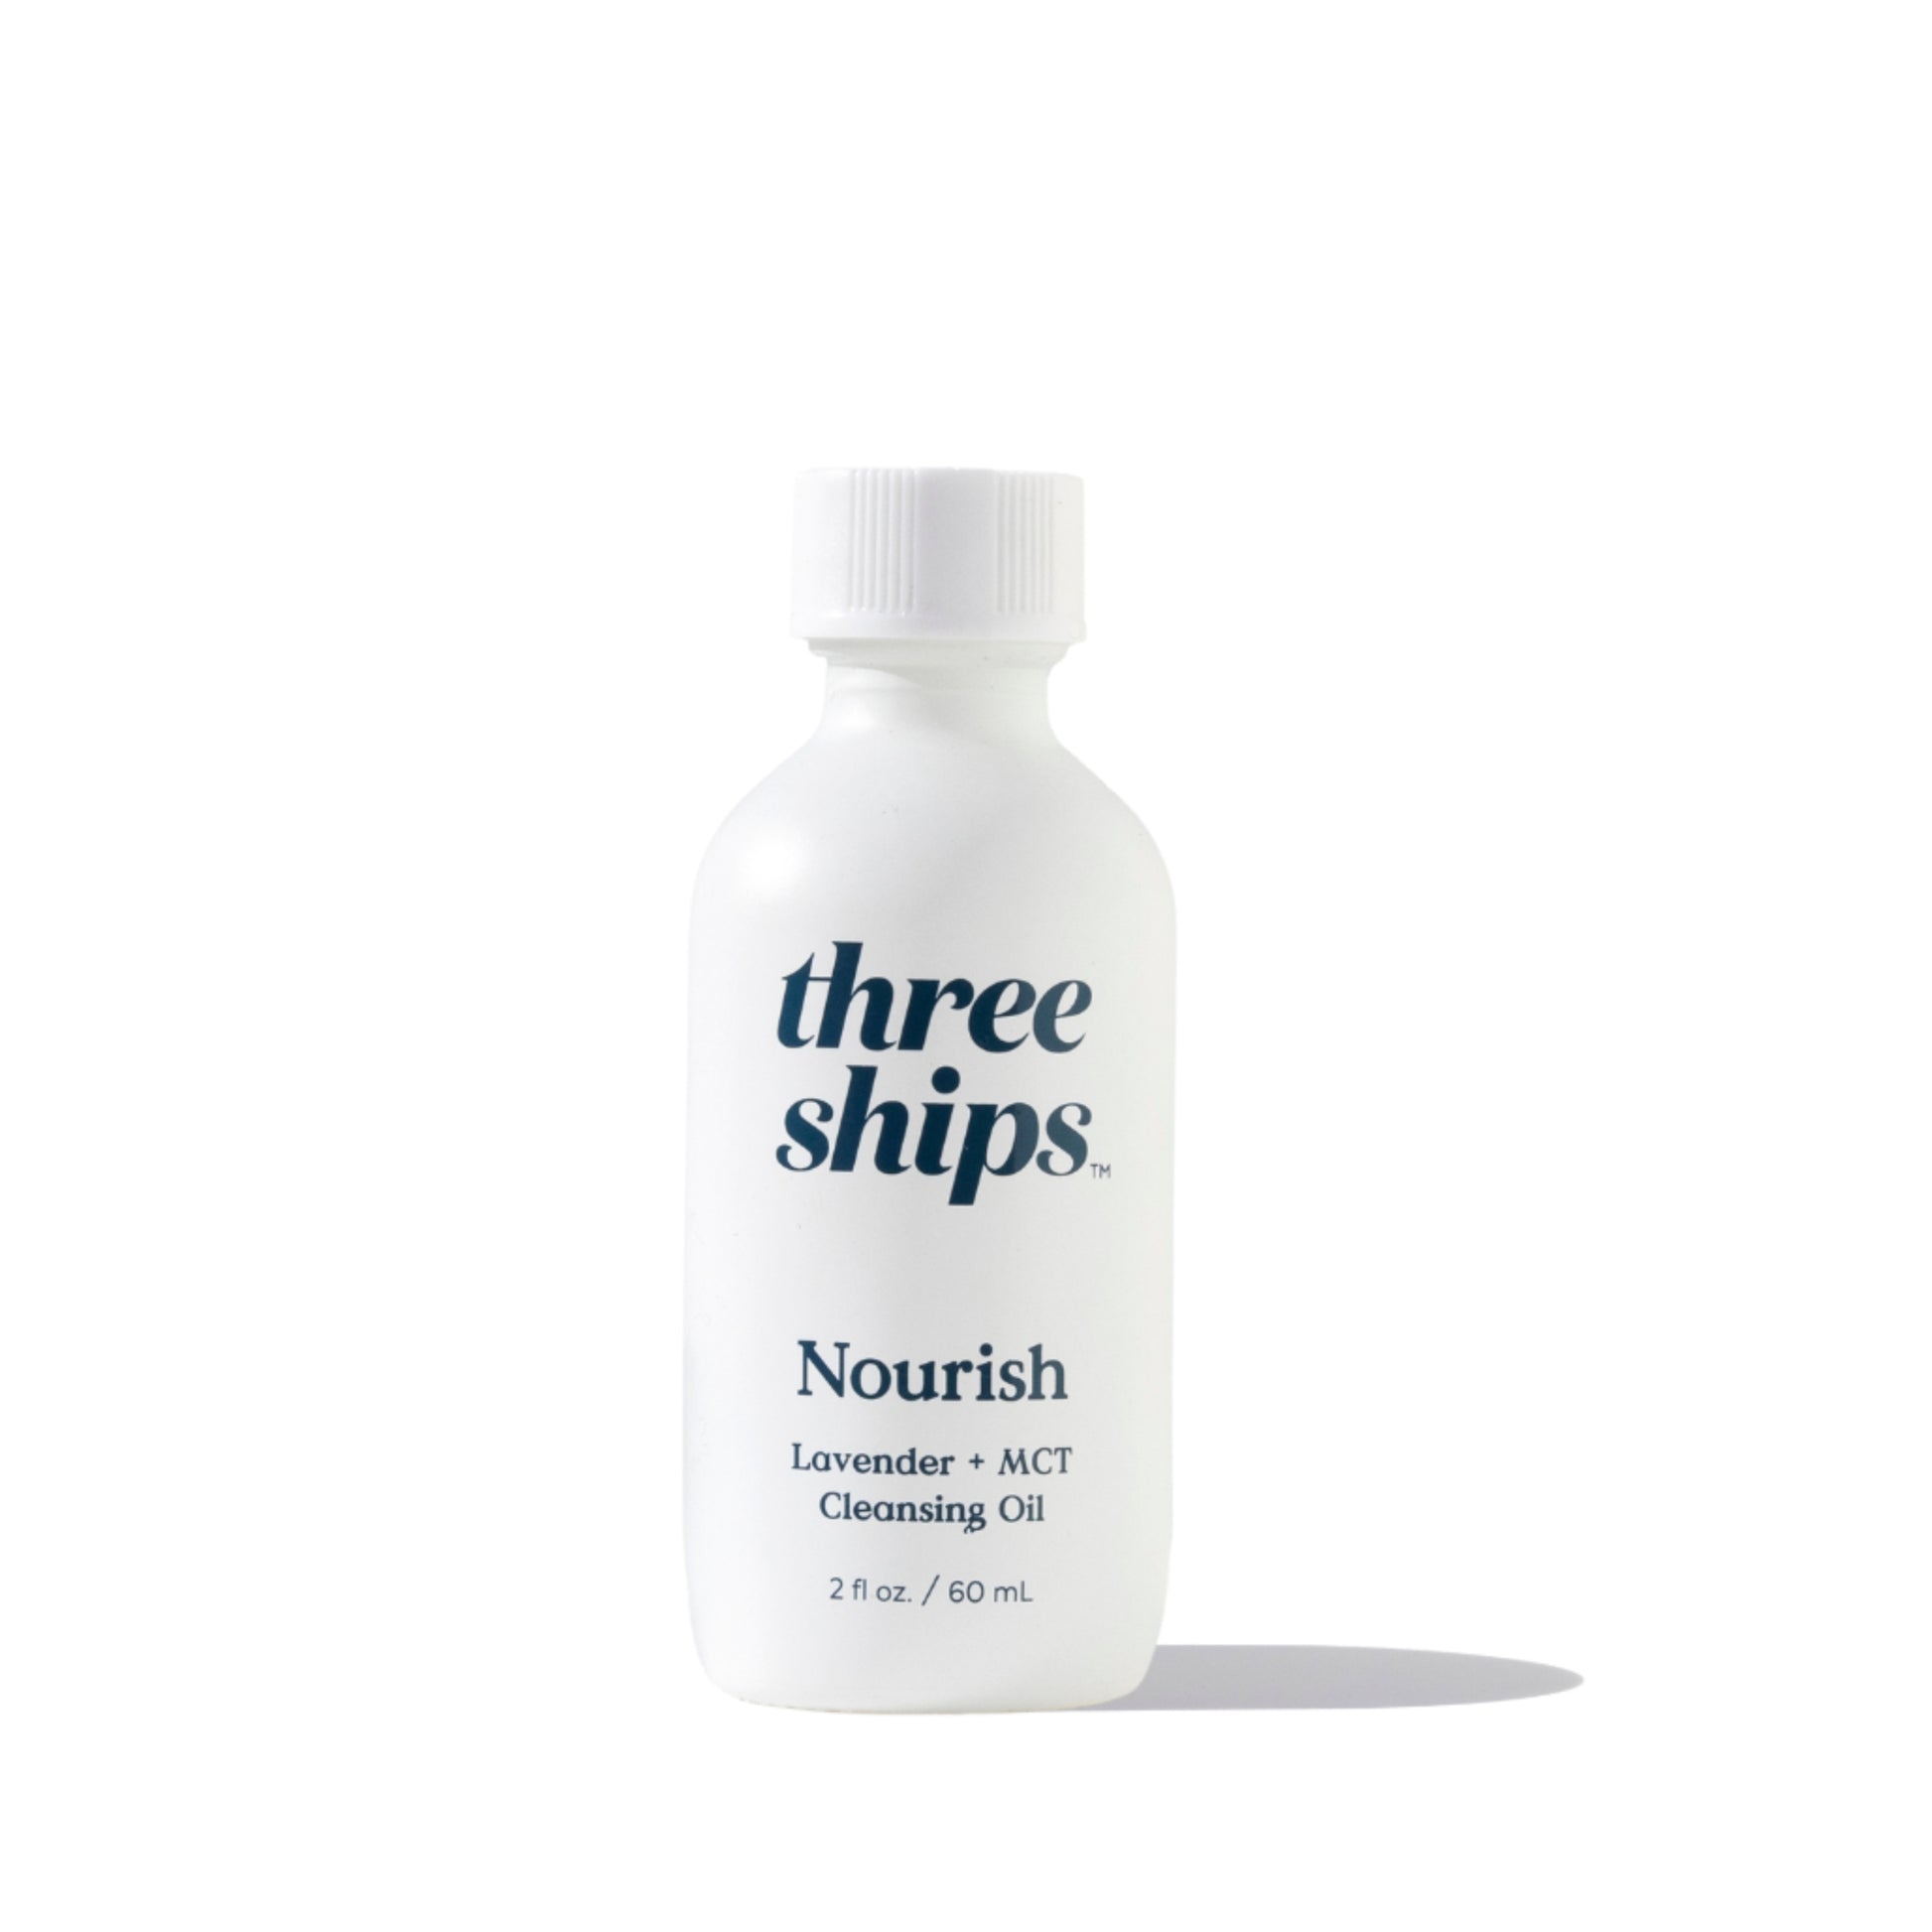 THREE SHIPS Nourish Lavender MCT Cleansing Oil